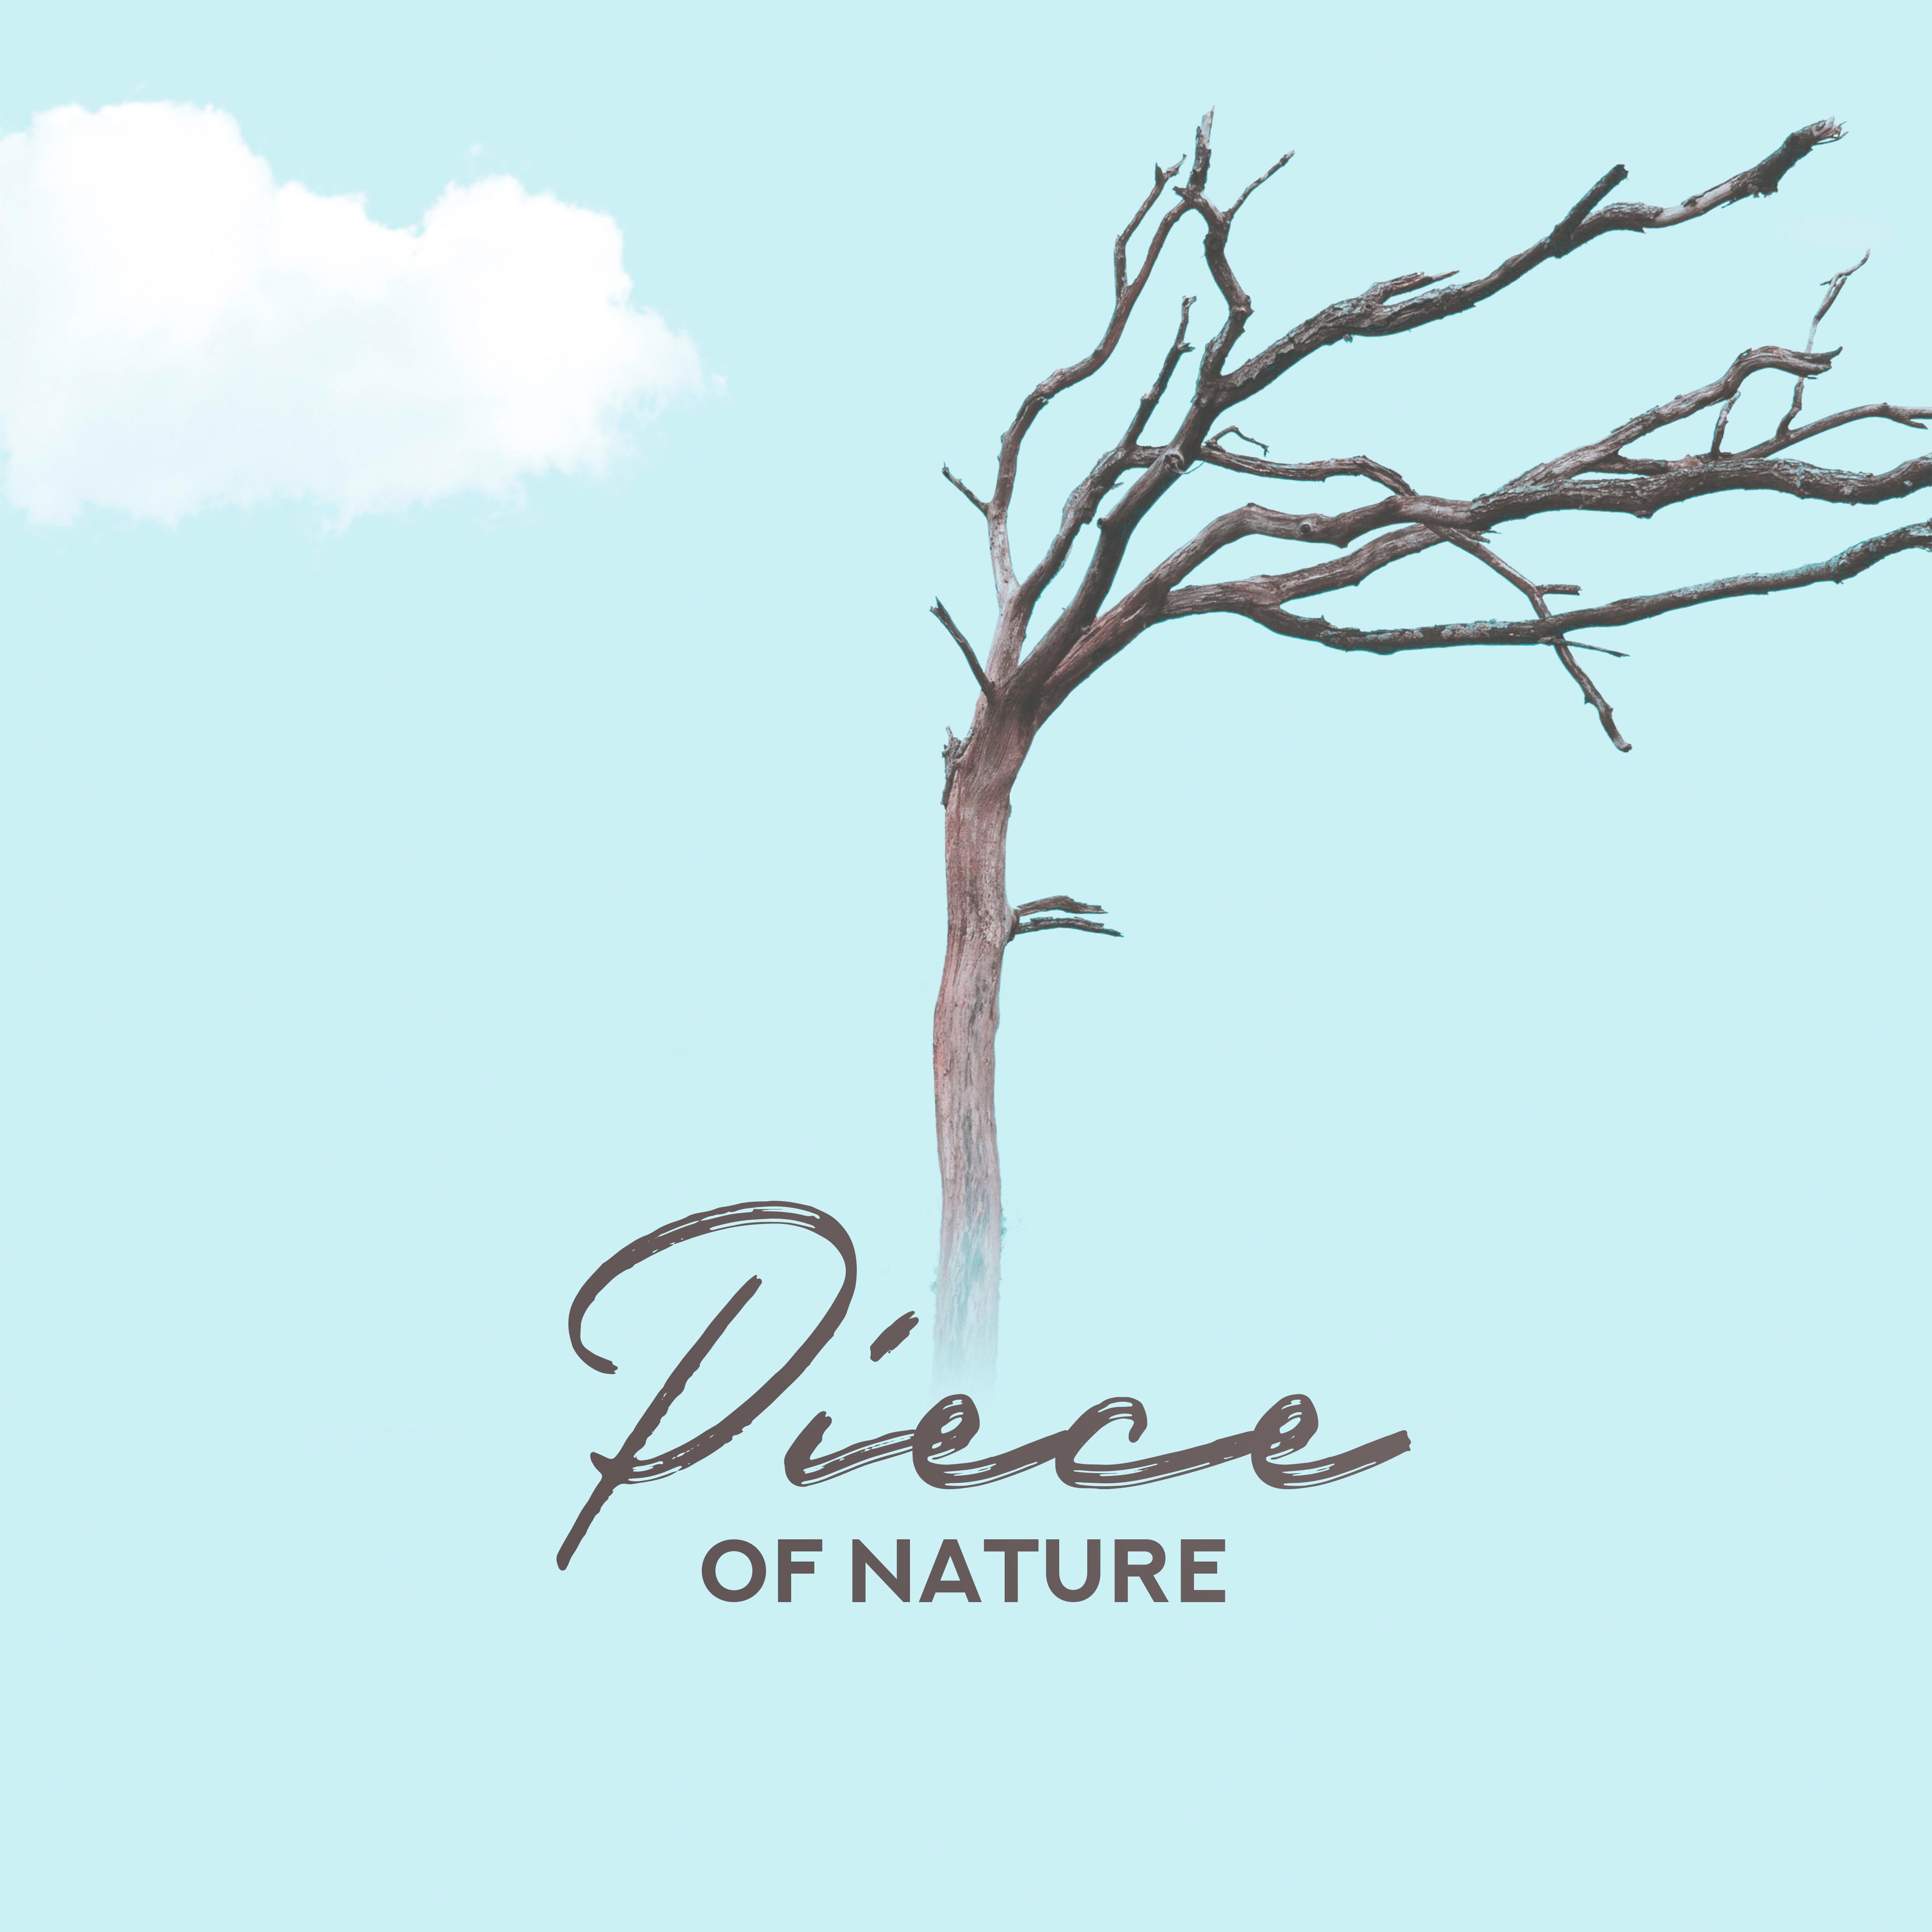 Piece of Nature – 15 Nature Sounds, Nature Music for Sleep, Meditation, Yoga Training, Relaxation, Zen Lounge